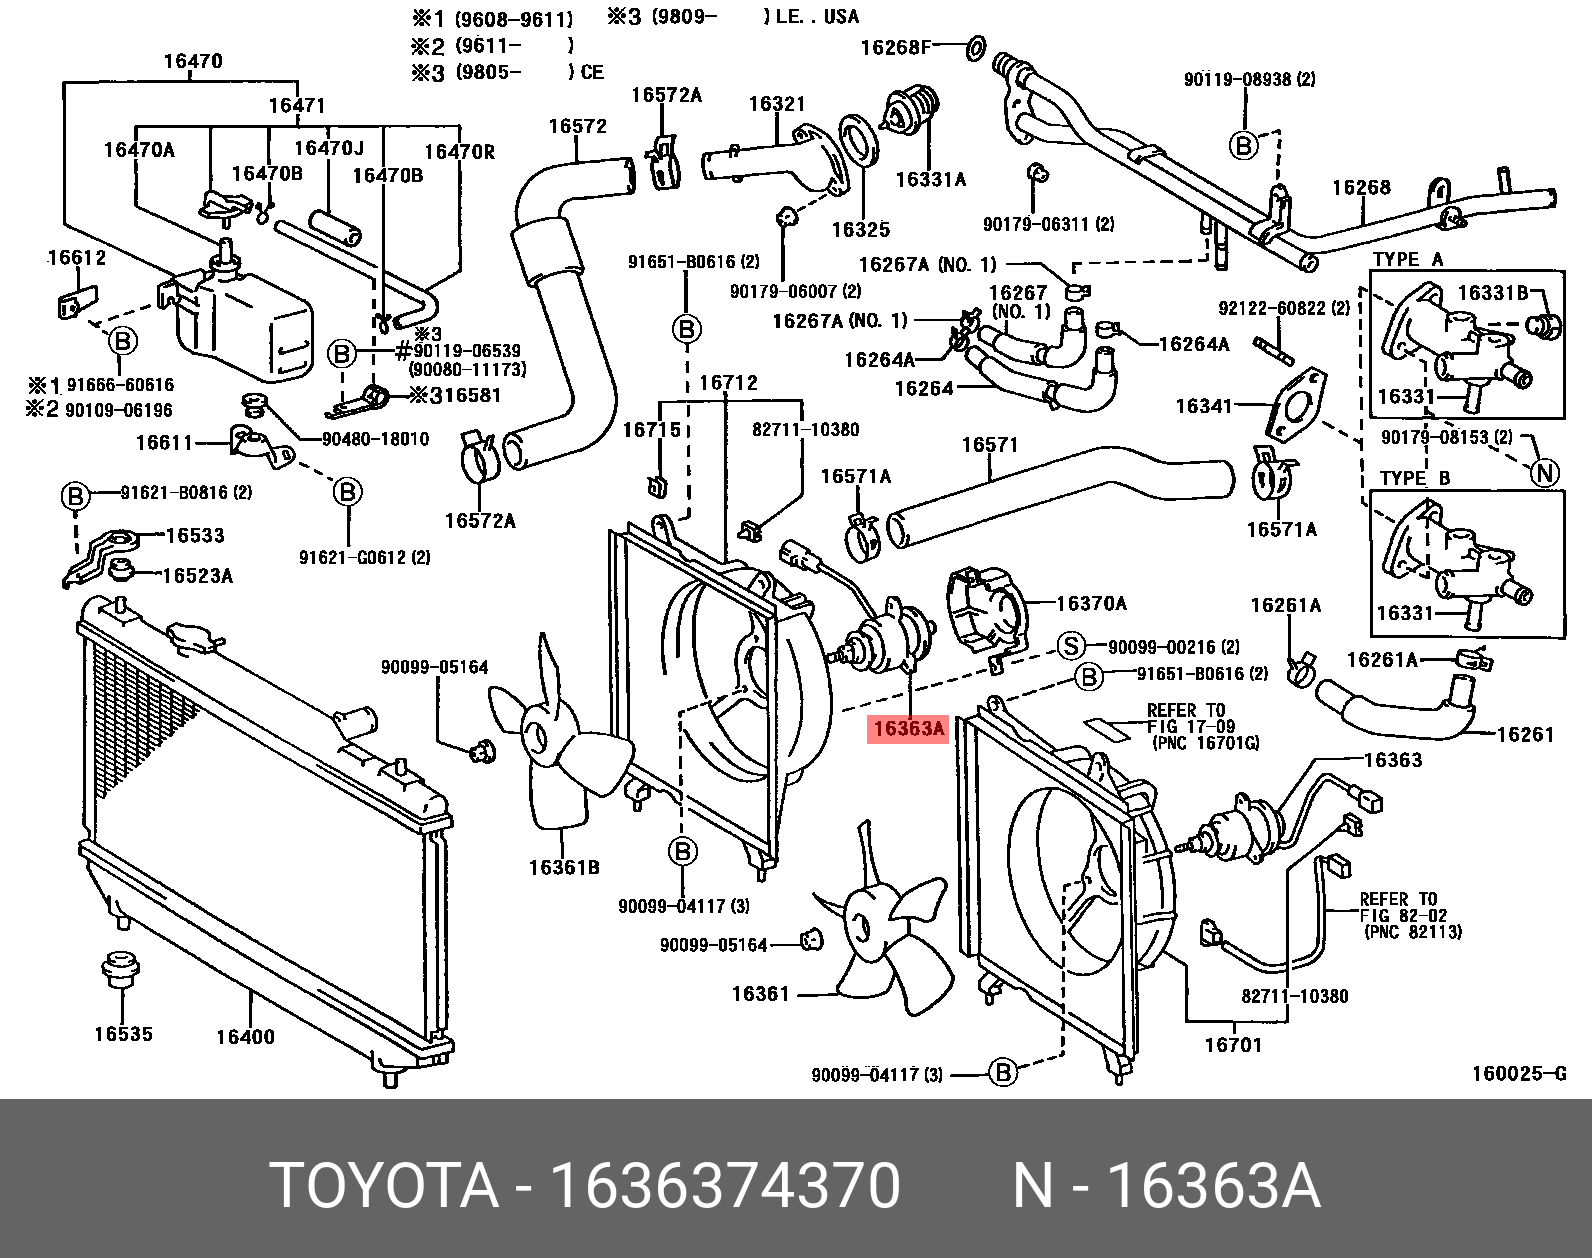 CAMRY 200109 - 200601, MOTOR, COOLING FAN, NO.2